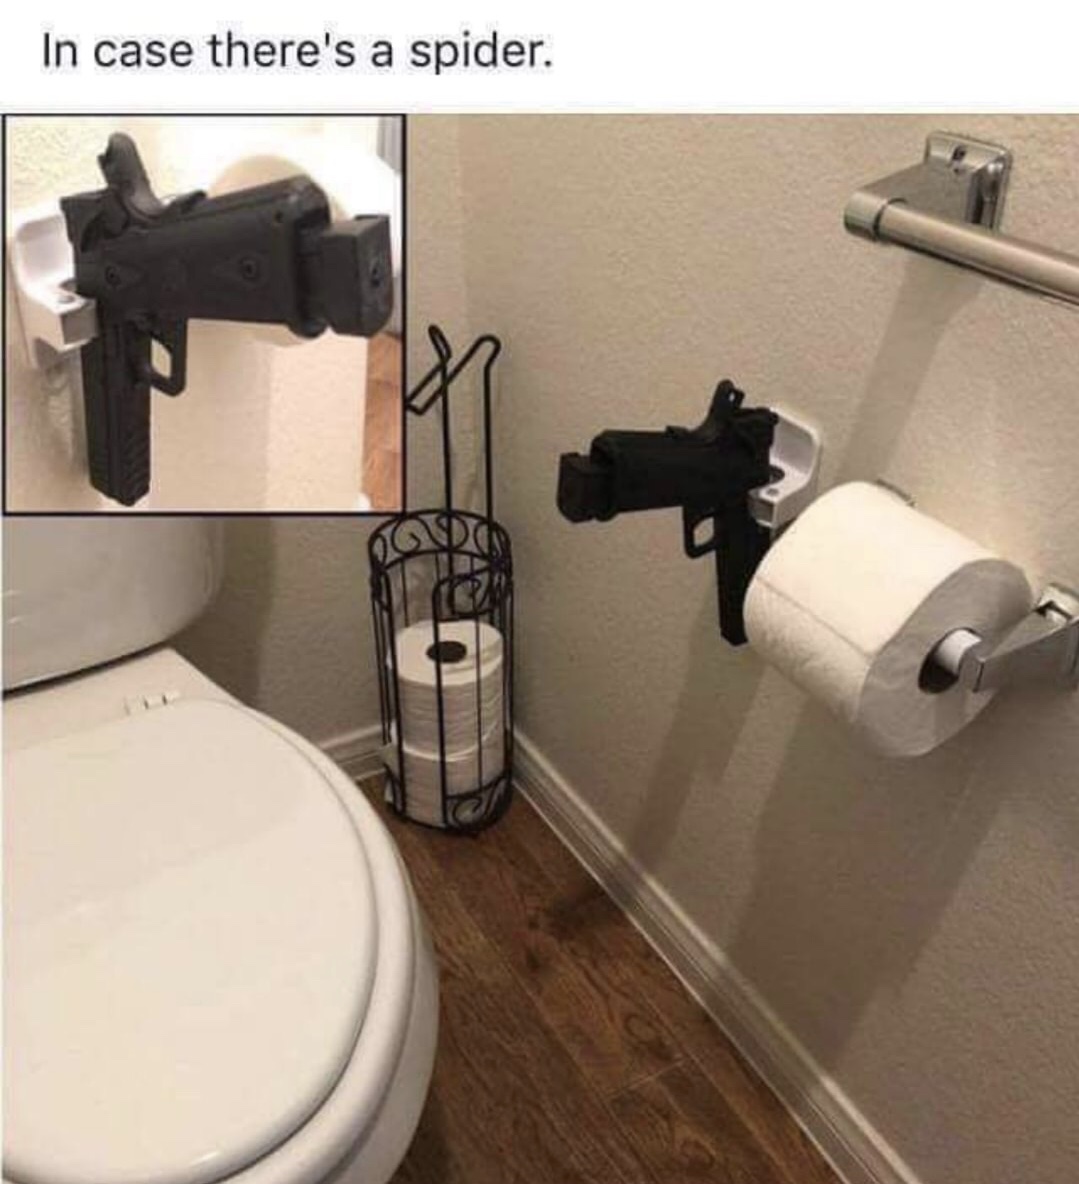 kevin hart gun in bathroom - In case there's a spider. Ovd